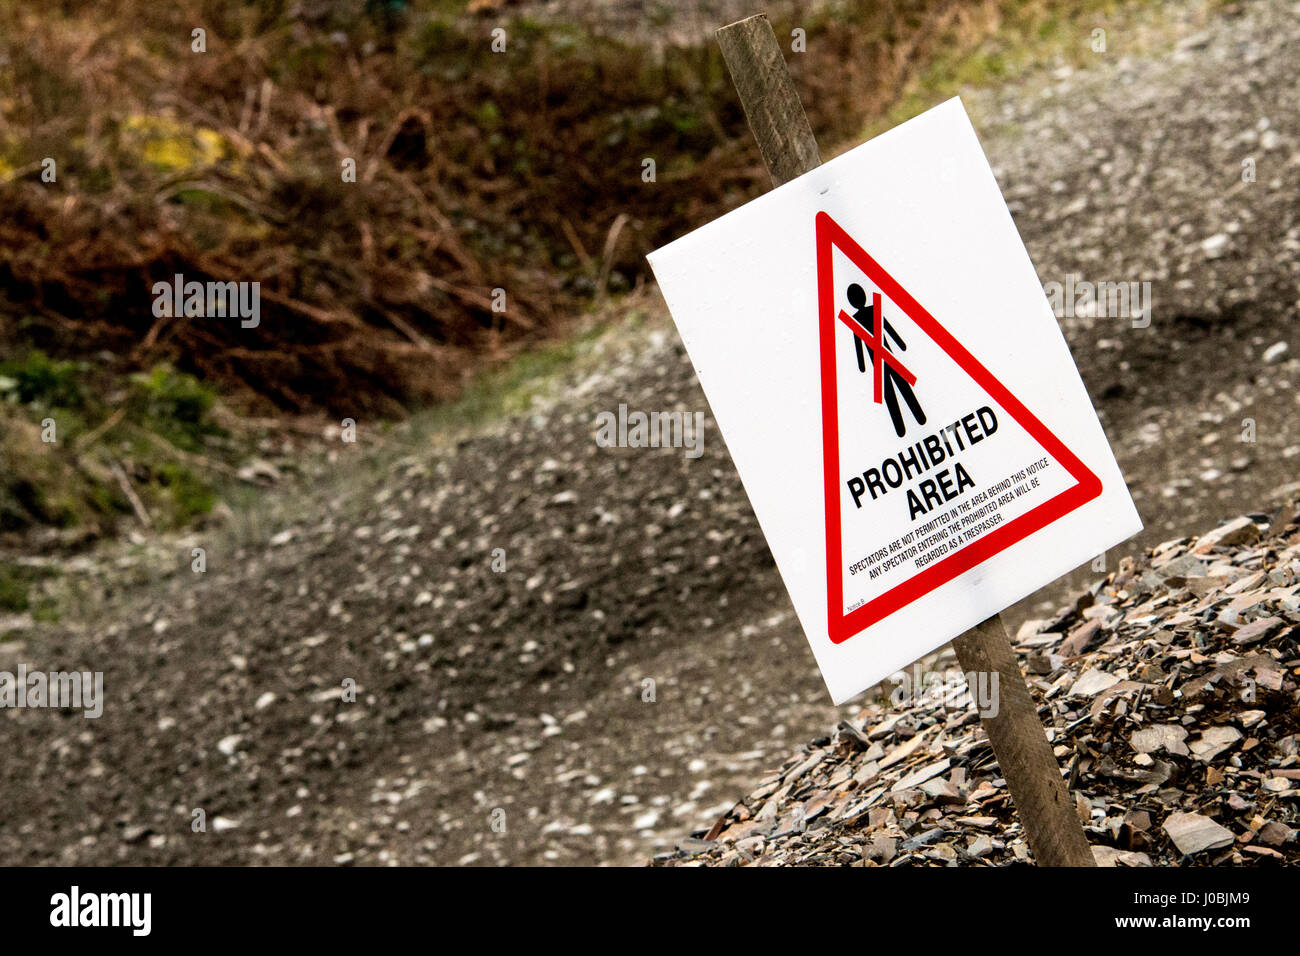 A view of a spectator safety sign on a British Motorsport forest rally event, indicating an area unsafe for spectators. Stock Photo